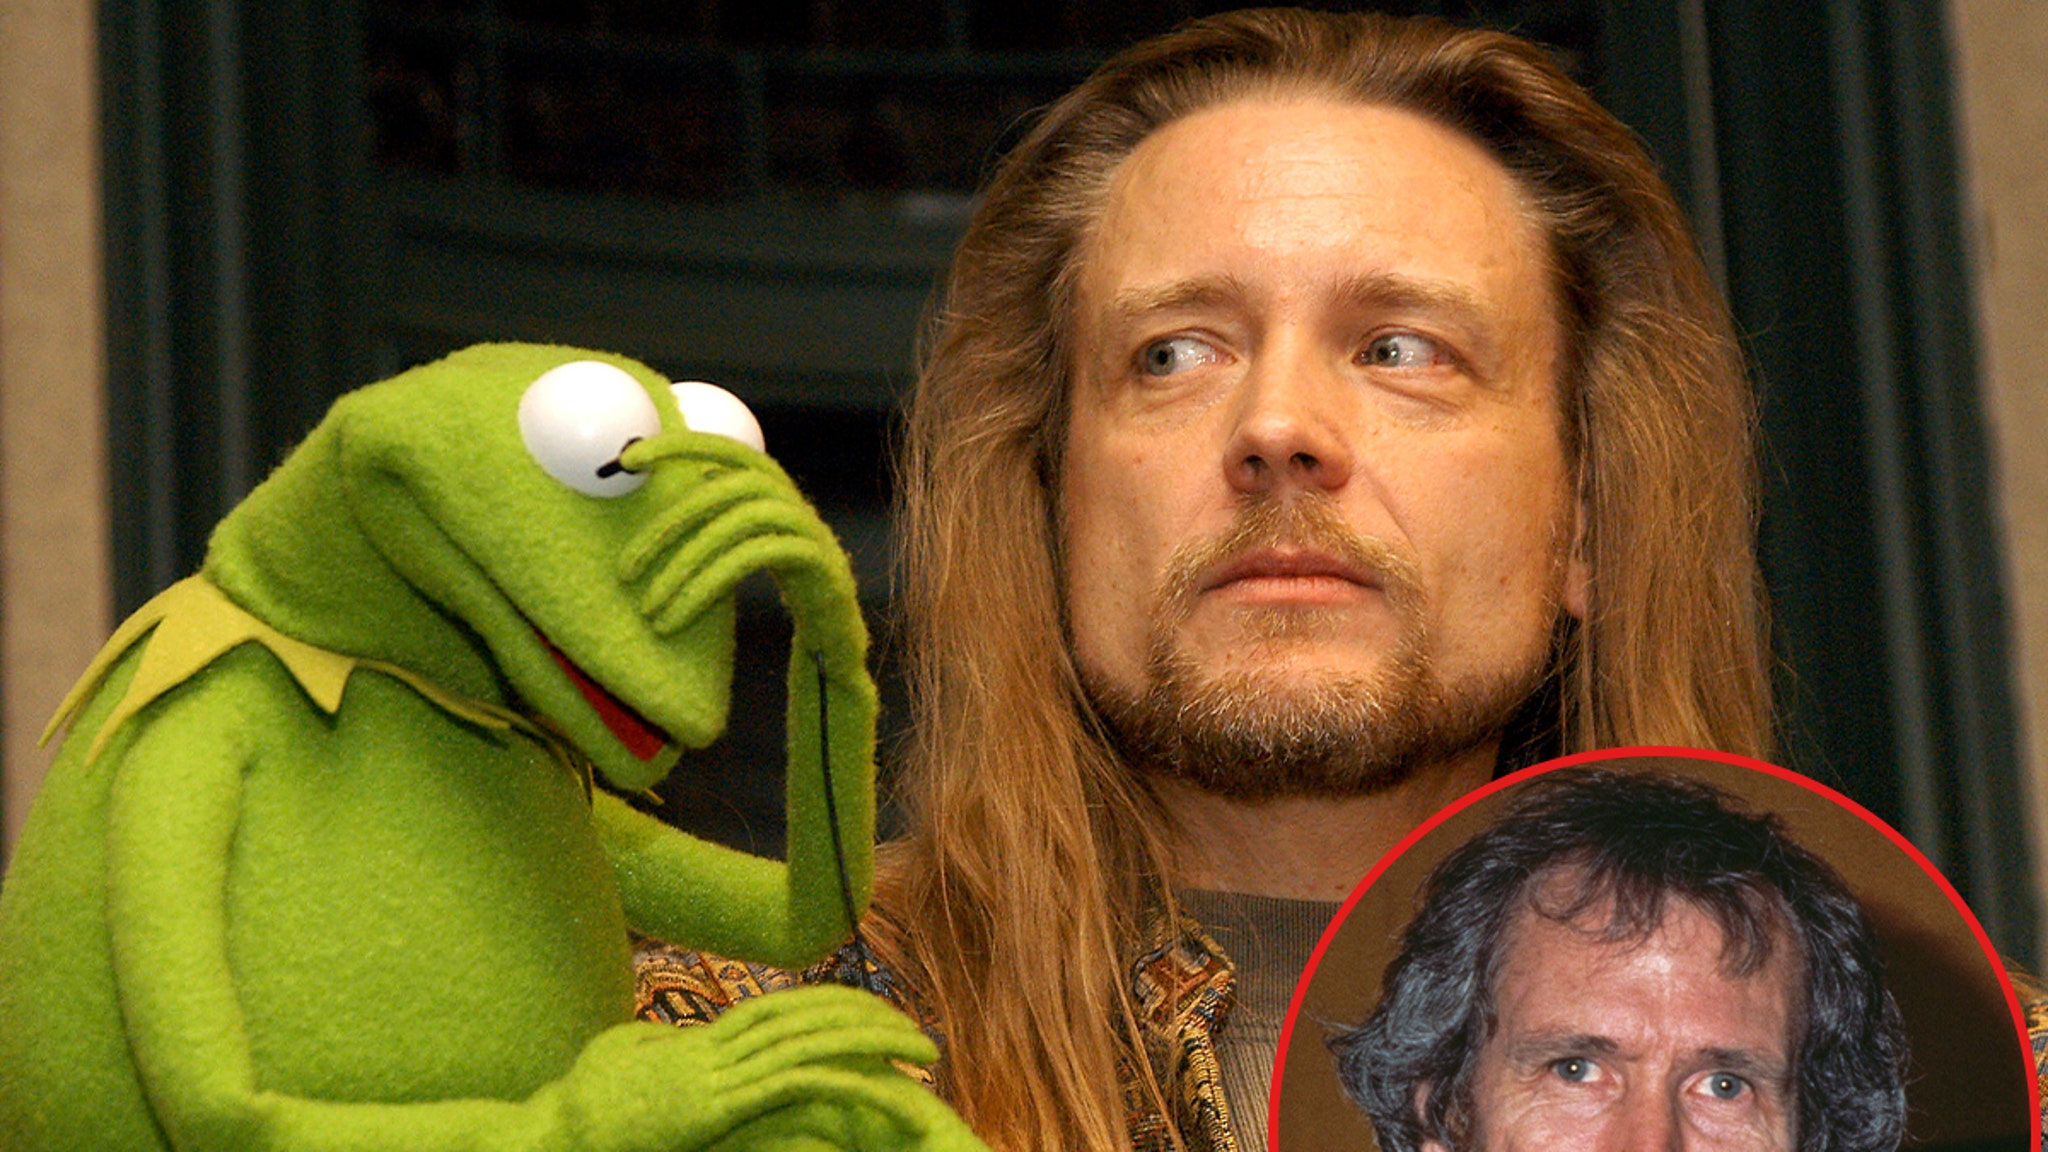 Kermit Voice Actor Says Jim Henson's Spirit Has 'Withered' Ahead of New Doc